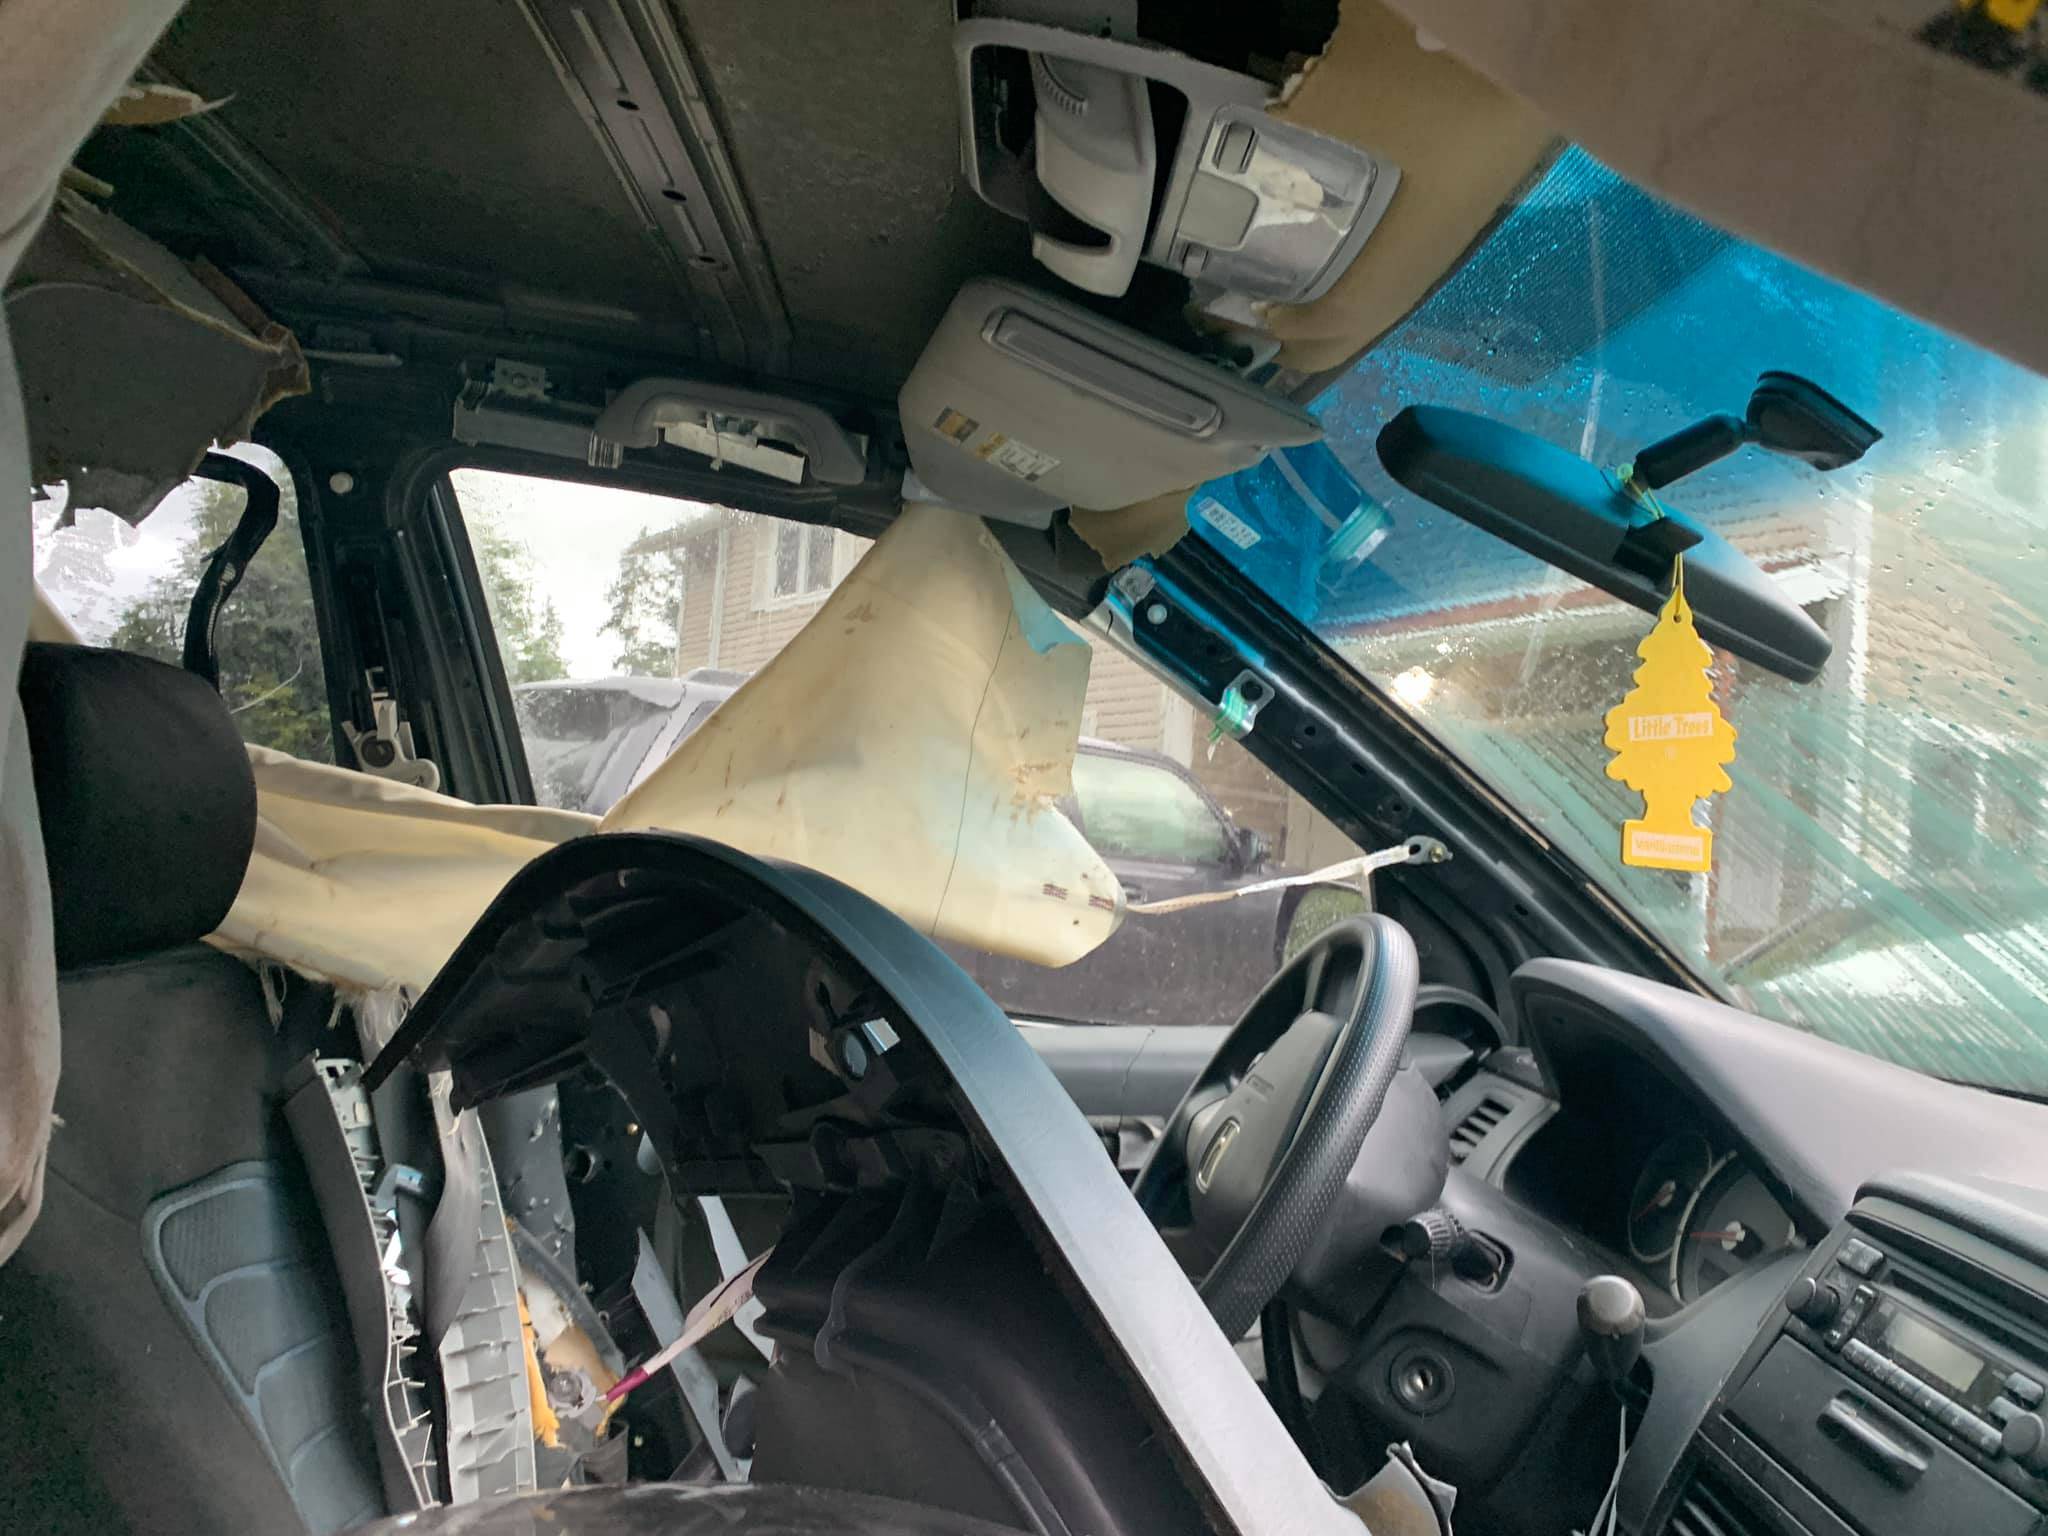 A bear broke into a pizza delivery car Friday morning, chasing the sweet scent. (Courtesy photo / Juneau Pizza)